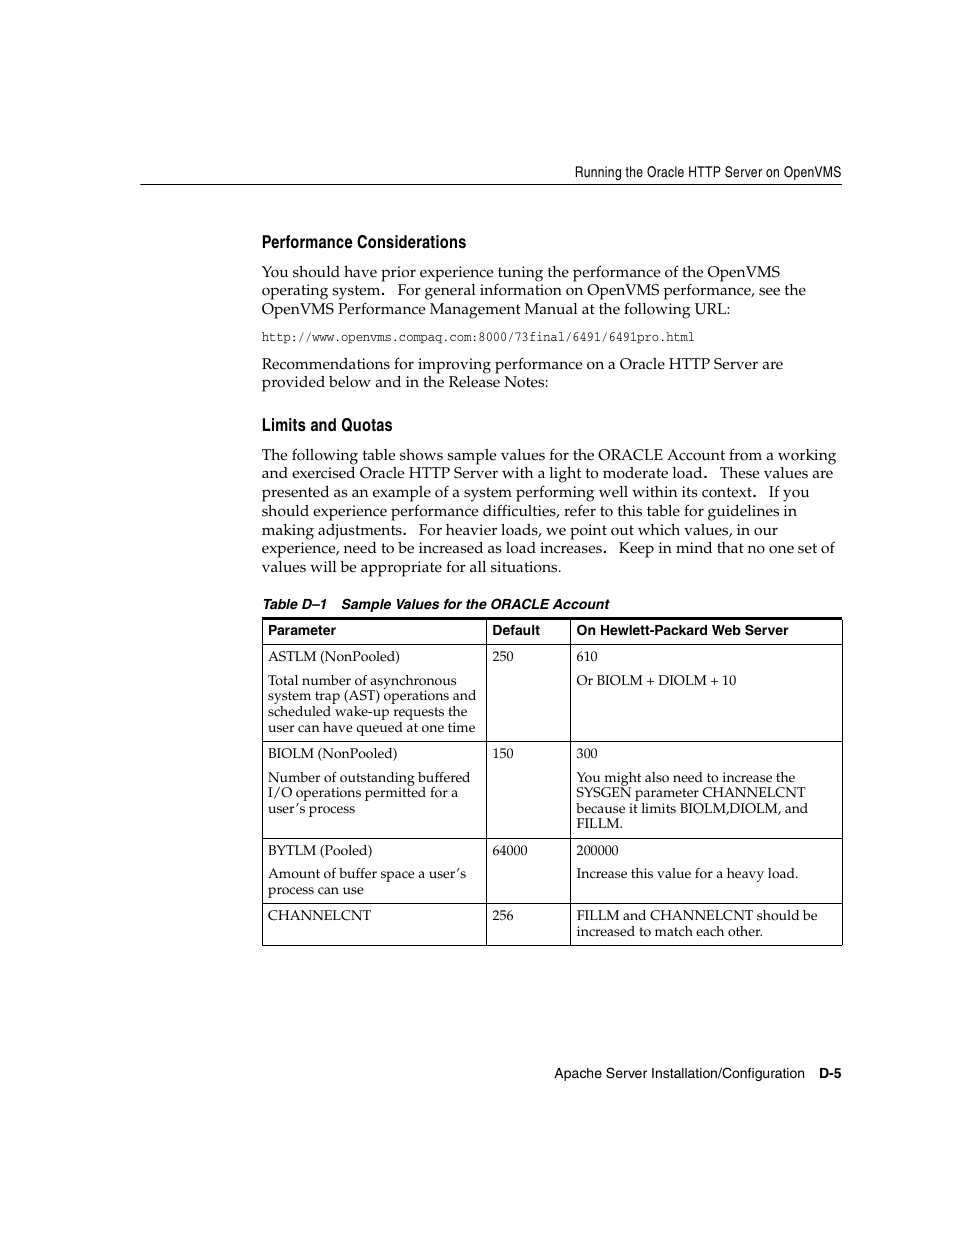 Performance considerations, Limits and quotas | Oracle Audio Technologies ORACLE9I B10508-01 User Manual | Page 151 / 186